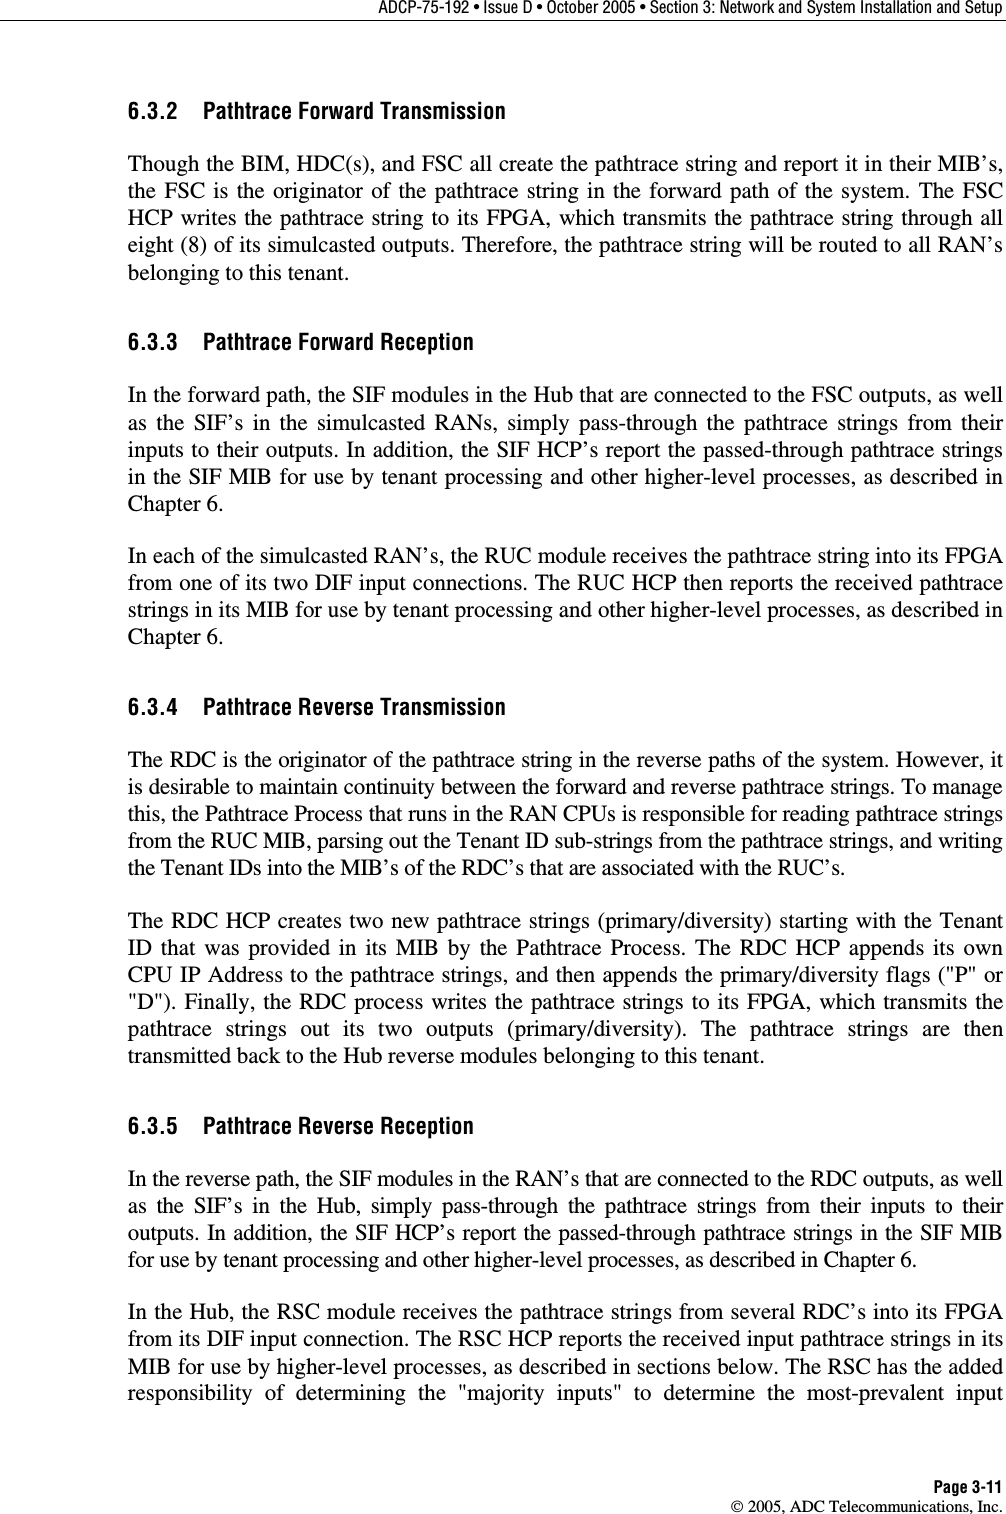 ADCP-75-192 • Issue D • October 2005 • Section 3: Network and System Installation and Setup Page 3-11  2005, ADC Telecommunications, Inc. 6.3.2  Pathtrace Forward Transmission Though the BIM, HDC(s), and FSC all create the pathtrace string and report it in their MIB’s, the FSC is the originator of the pathtrace string in the forward path of the system. The FSC HCP writes the pathtrace string to its FPGA, which transmits the pathtrace string through all eight (8) of its simulcasted outputs. Therefore, the pathtrace string will be routed to all RAN’s belonging to this tenant.  6.3.3  Pathtrace Forward Reception In the forward path, the SIF modules in the Hub that are connected to the FSC outputs, as well as the SIF’s in the simulcasted RANs, simply pass-through the pathtrace strings from their inputs to their outputs. In addition, the SIF HCP’s report the passed-through pathtrace strings in the SIF MIB for use by tenant processing and other higher-level processes, as described in Chapter 6.  In each of the simulcasted RAN’s, the RUC module receives the pathtrace string into its FPGA from one of its two DIF input connections. The RUC HCP then reports the received pathtrace strings in its MIB for use by tenant processing and other higher-level processes, as described in Chapter 6.  6.3.4  Pathtrace Reverse Transmission The RDC is the originator of the pathtrace string in the reverse paths of the system. However, it is desirable to maintain continuity between the forward and reverse pathtrace strings. To manage this, the Pathtrace Process that runs in the RAN CPUs is responsible for reading pathtrace strings from the RUC MIB, parsing out the Tenant ID sub-strings from the pathtrace strings, and writing the Tenant IDs into the MIB’s of the RDC’s that are associated with the RUC’s. The RDC HCP creates two new pathtrace strings (primary/diversity) starting with the Tenant ID that was provided in its MIB by the Pathtrace Process. The RDC HCP appends its own CPU IP Address to the pathtrace strings, and then appends the primary/diversity flags (&quot;P&quot; or &quot;D&quot;). Finally, the RDC process writes the pathtrace strings to its FPGA, which transmits the pathtrace strings out its two outputs (primary/diversity). The pathtrace strings are then transmitted back to the Hub reverse modules belonging to this tenant. 6.3.5  Pathtrace Reverse Reception In the reverse path, the SIF modules in the RAN’s that are connected to the RDC outputs, as well as the SIF’s in the Hub, simply pass-through the pathtrace strings from their inputs to their outputs. In addition, the SIF HCP’s report the passed-through pathtrace strings in the SIF MIB for use by tenant processing and other higher-level processes, as described in Chapter 6. In the Hub, the RSC module receives the pathtrace strings from several RDC’s into its FPGA from its DIF input connection. The RSC HCP reports the received input pathtrace strings in its MIB for use by higher-level processes, as described in sections below. The RSC has the added responsibility of determining the &quot;majority inputs&quot; to determine the most-prevalent input 